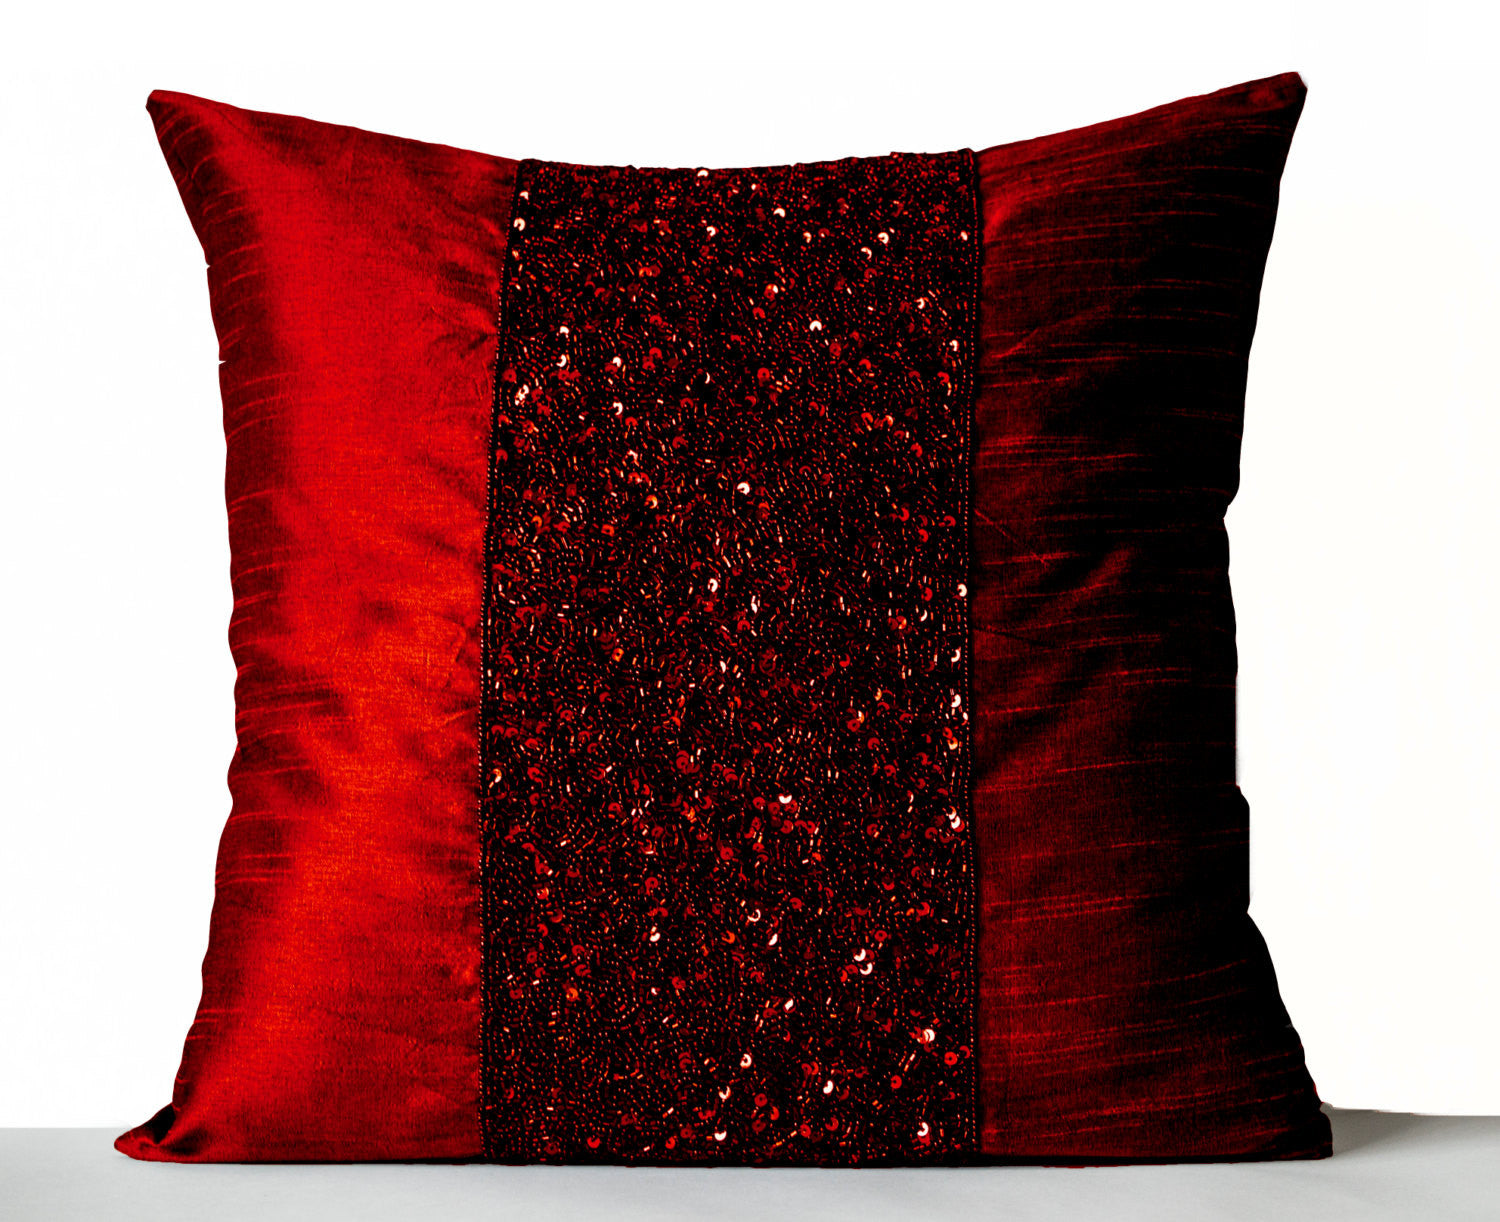 Handmade red pillow case with embroidery and beads